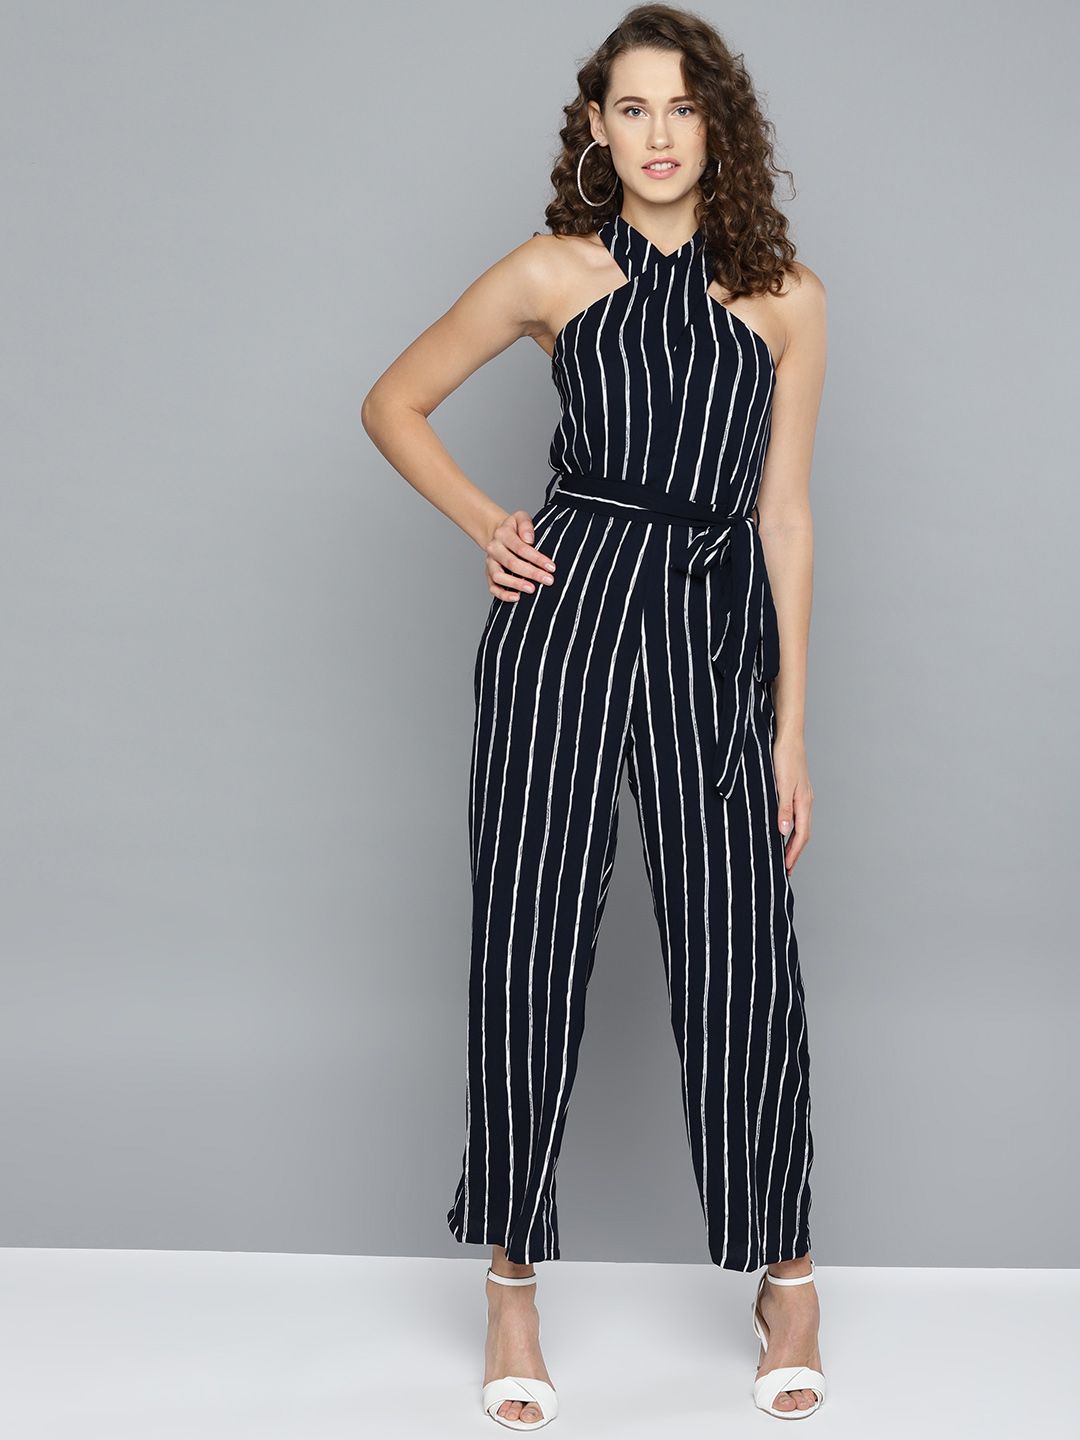 Marie Claire Women Navy Blue & White Striped Basic Jumpsuit Price in India